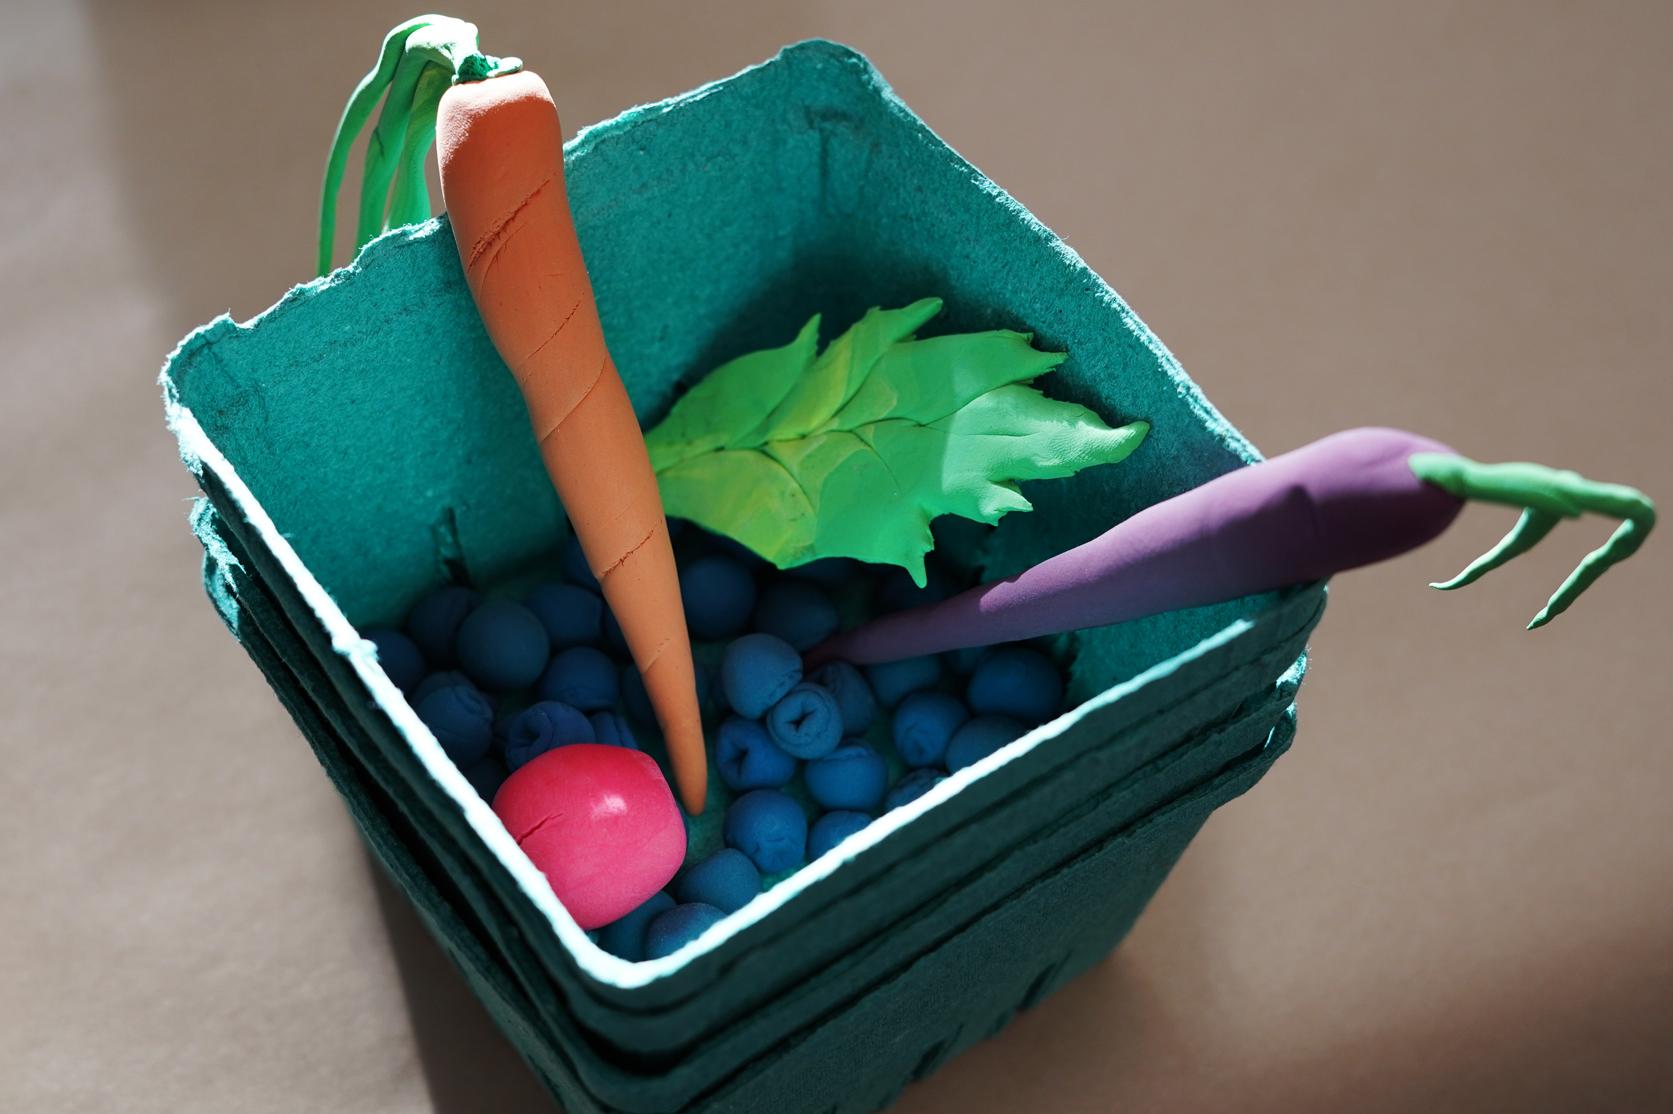 Photo of fruits and vegetables made of modeling clay in a green molded pulp berry basket